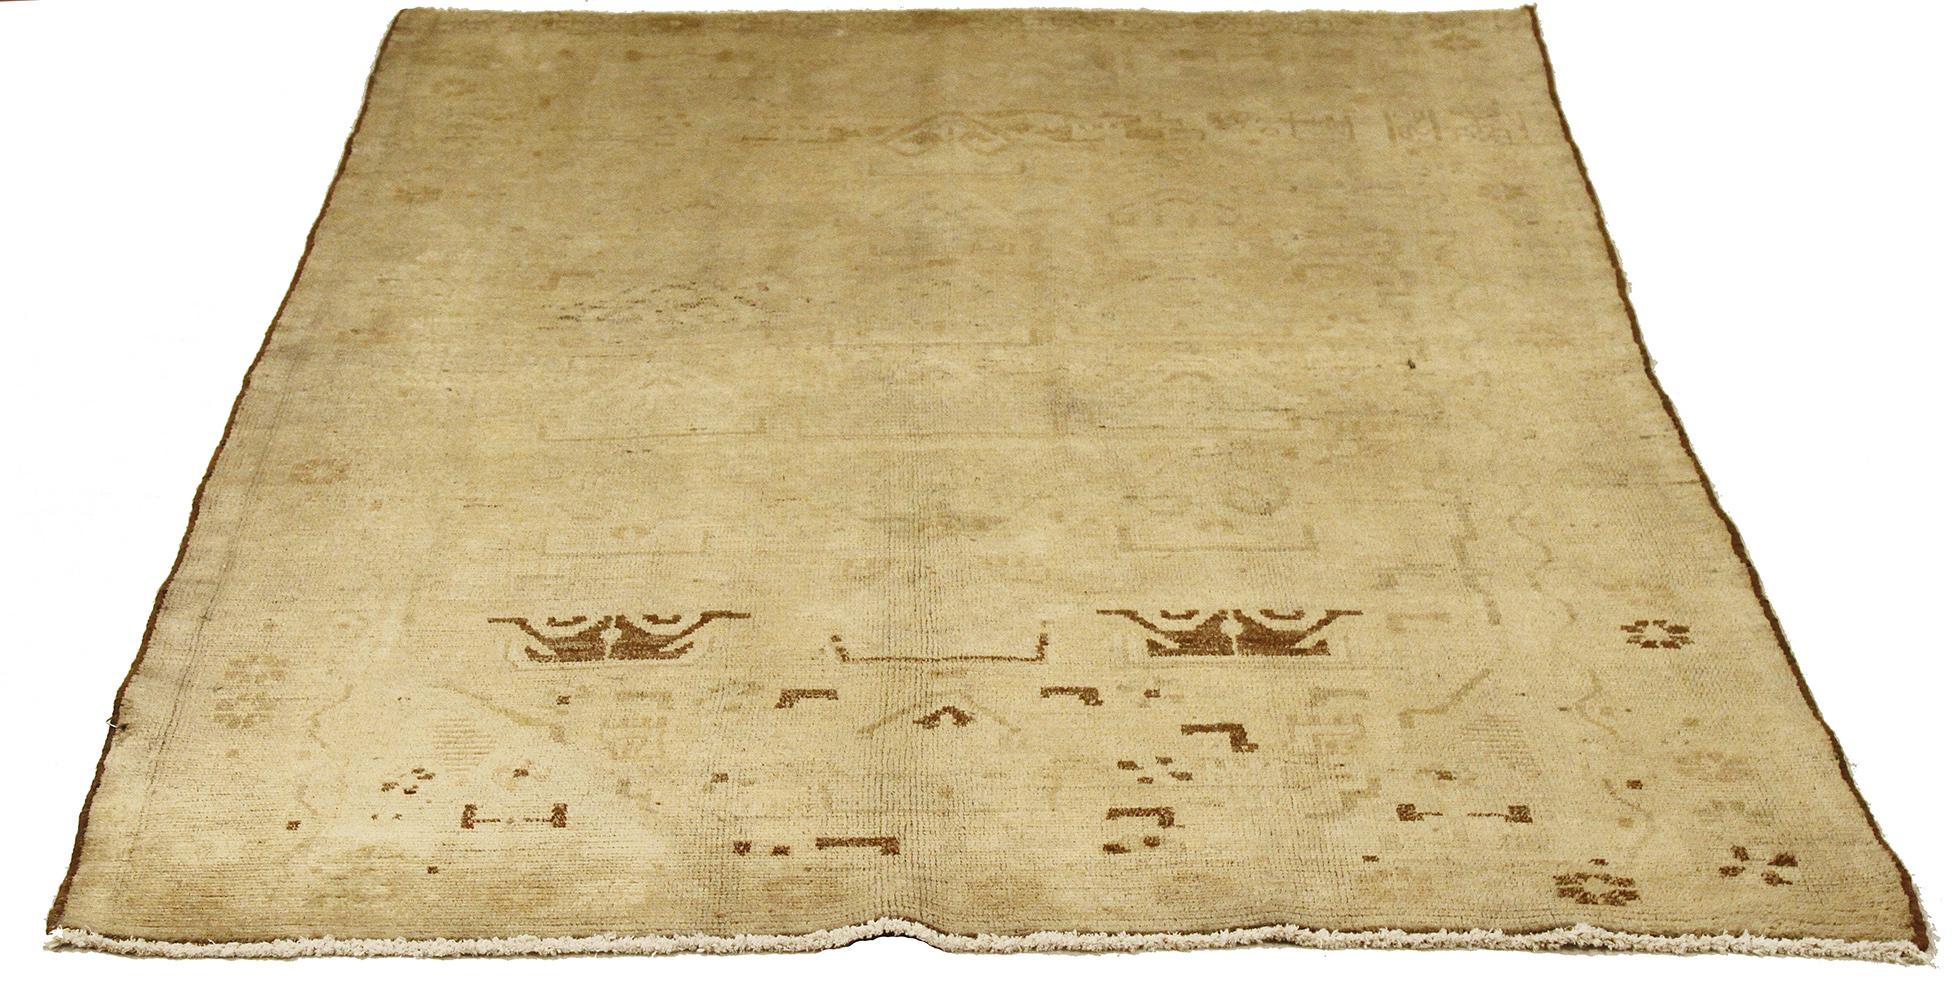 Antique Persian runner rug handwoven from the finest sheep’s wool and colored with all-natural vegetable dyes that are safe for humans and pets. It’s a traditional Malayer design featuring faded brown botanical details over an ivory field. It’s a